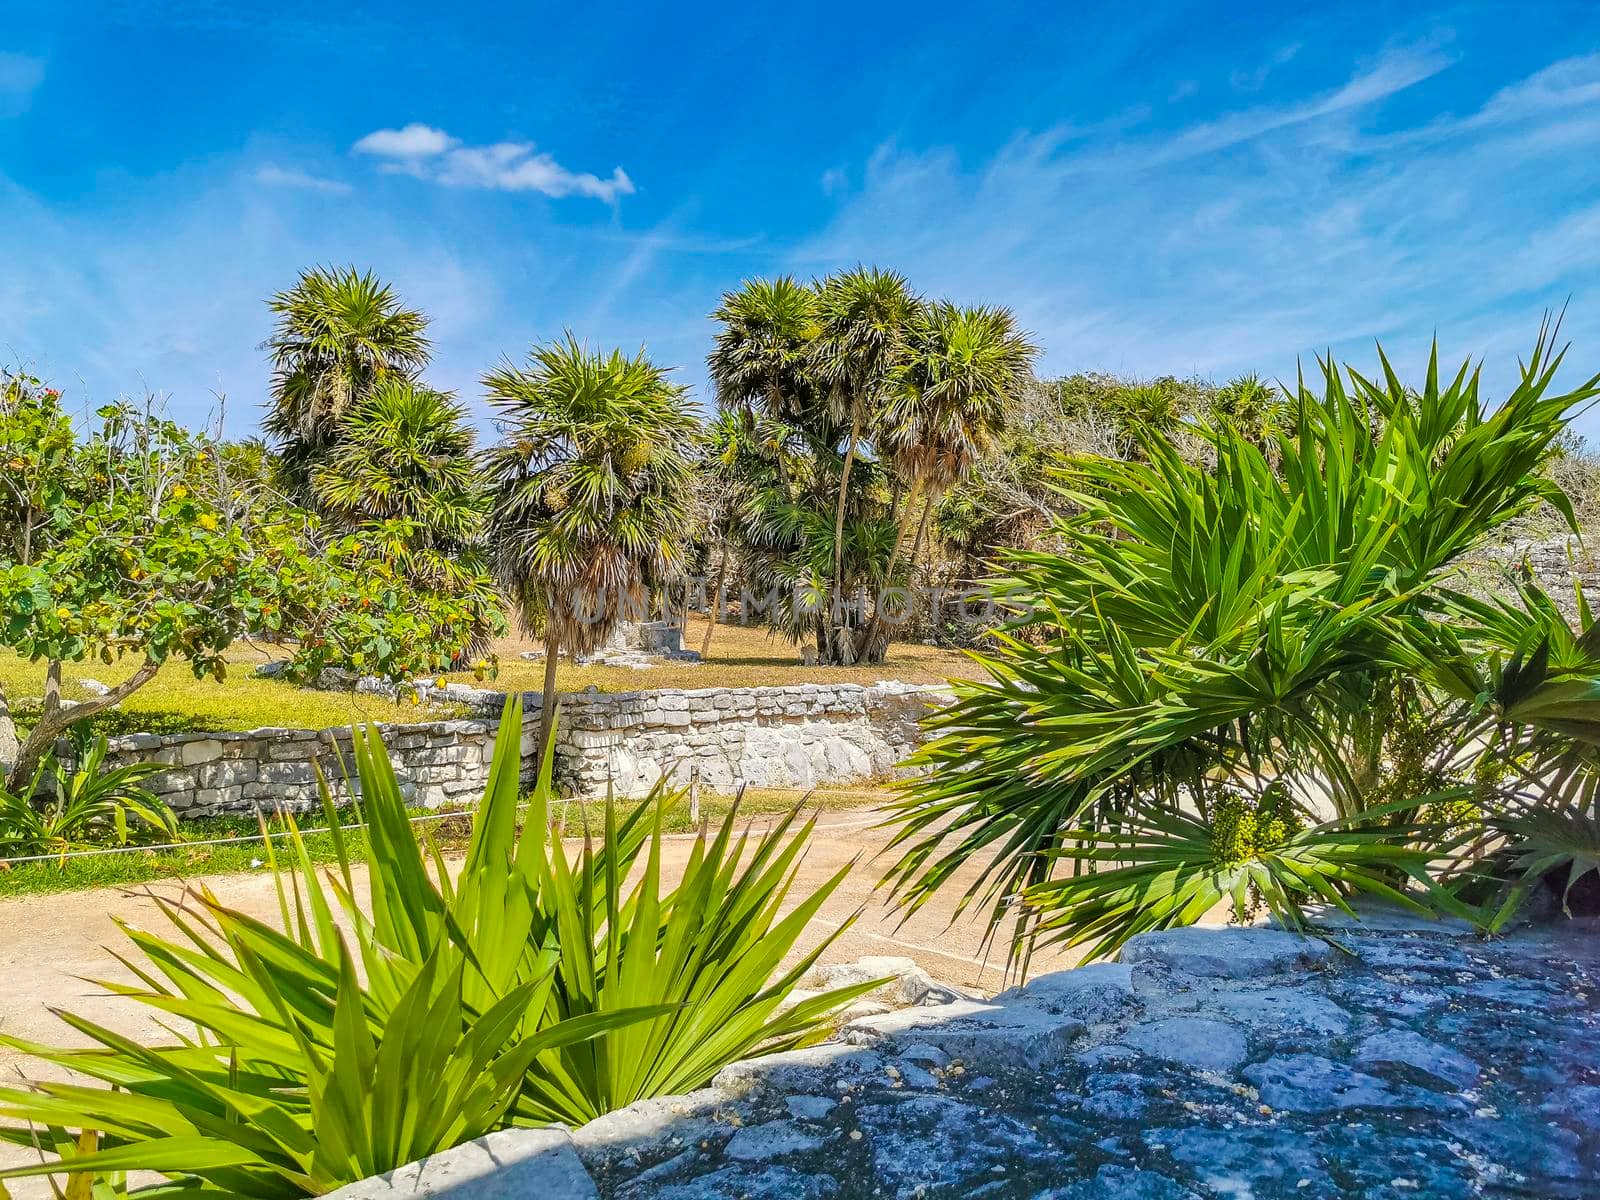 Ancient Tulum ruins Mayan site temple pyramids artifacts seascape Mexico. by Arkadij